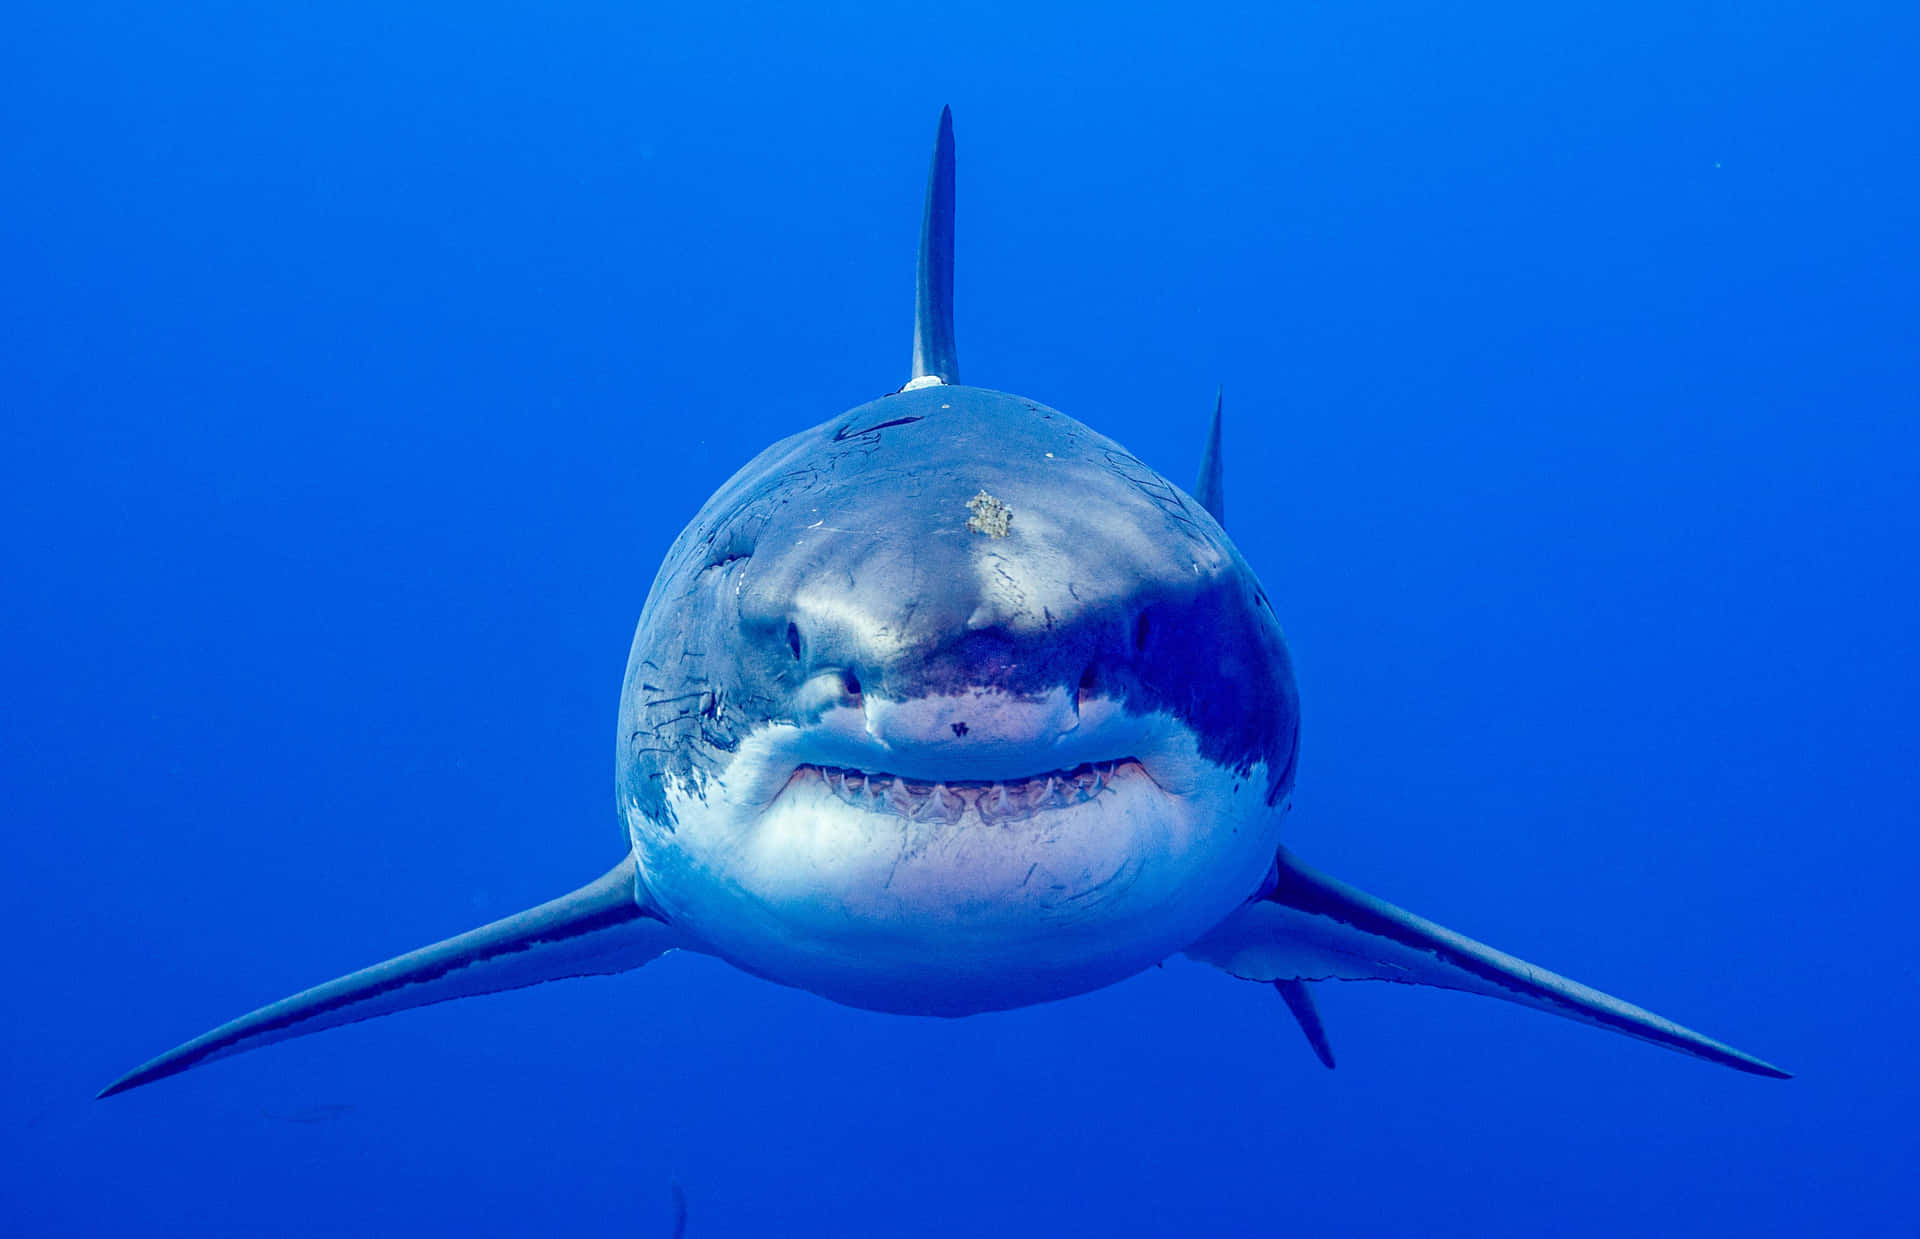 Come explore the deep blue ocean with a majestic shark.